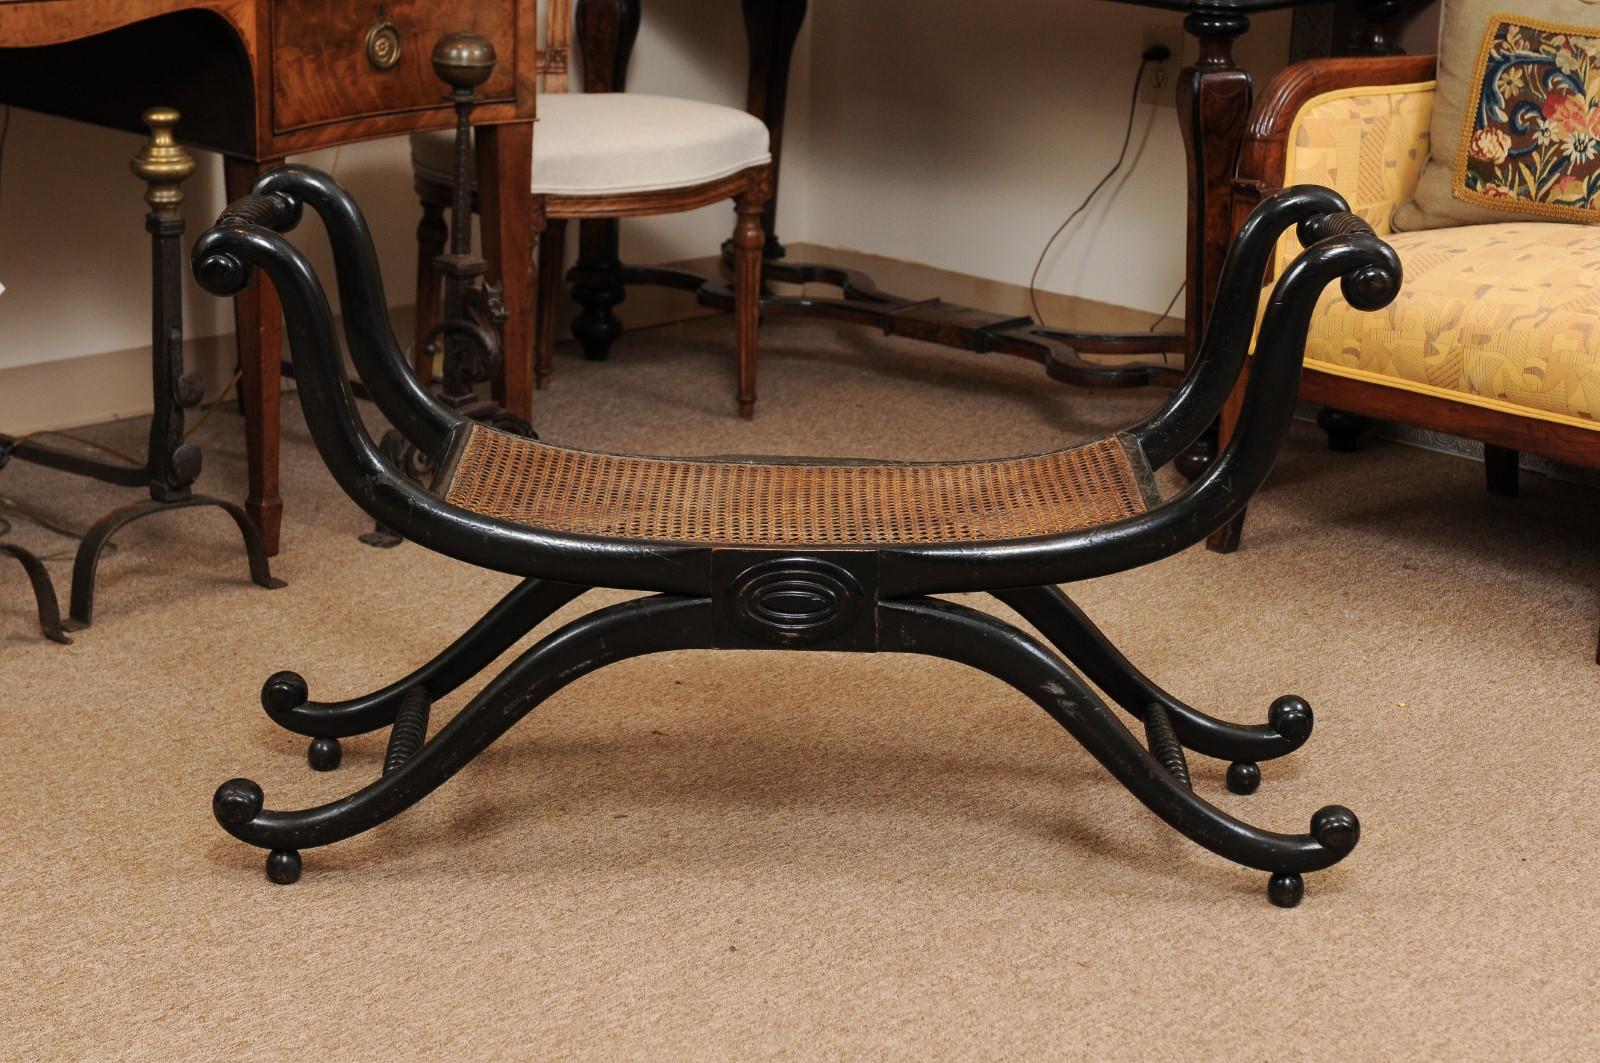 An early 19th century Regency English ebonized elongated curule stool/bench featuring scrolled arms and caned seat.